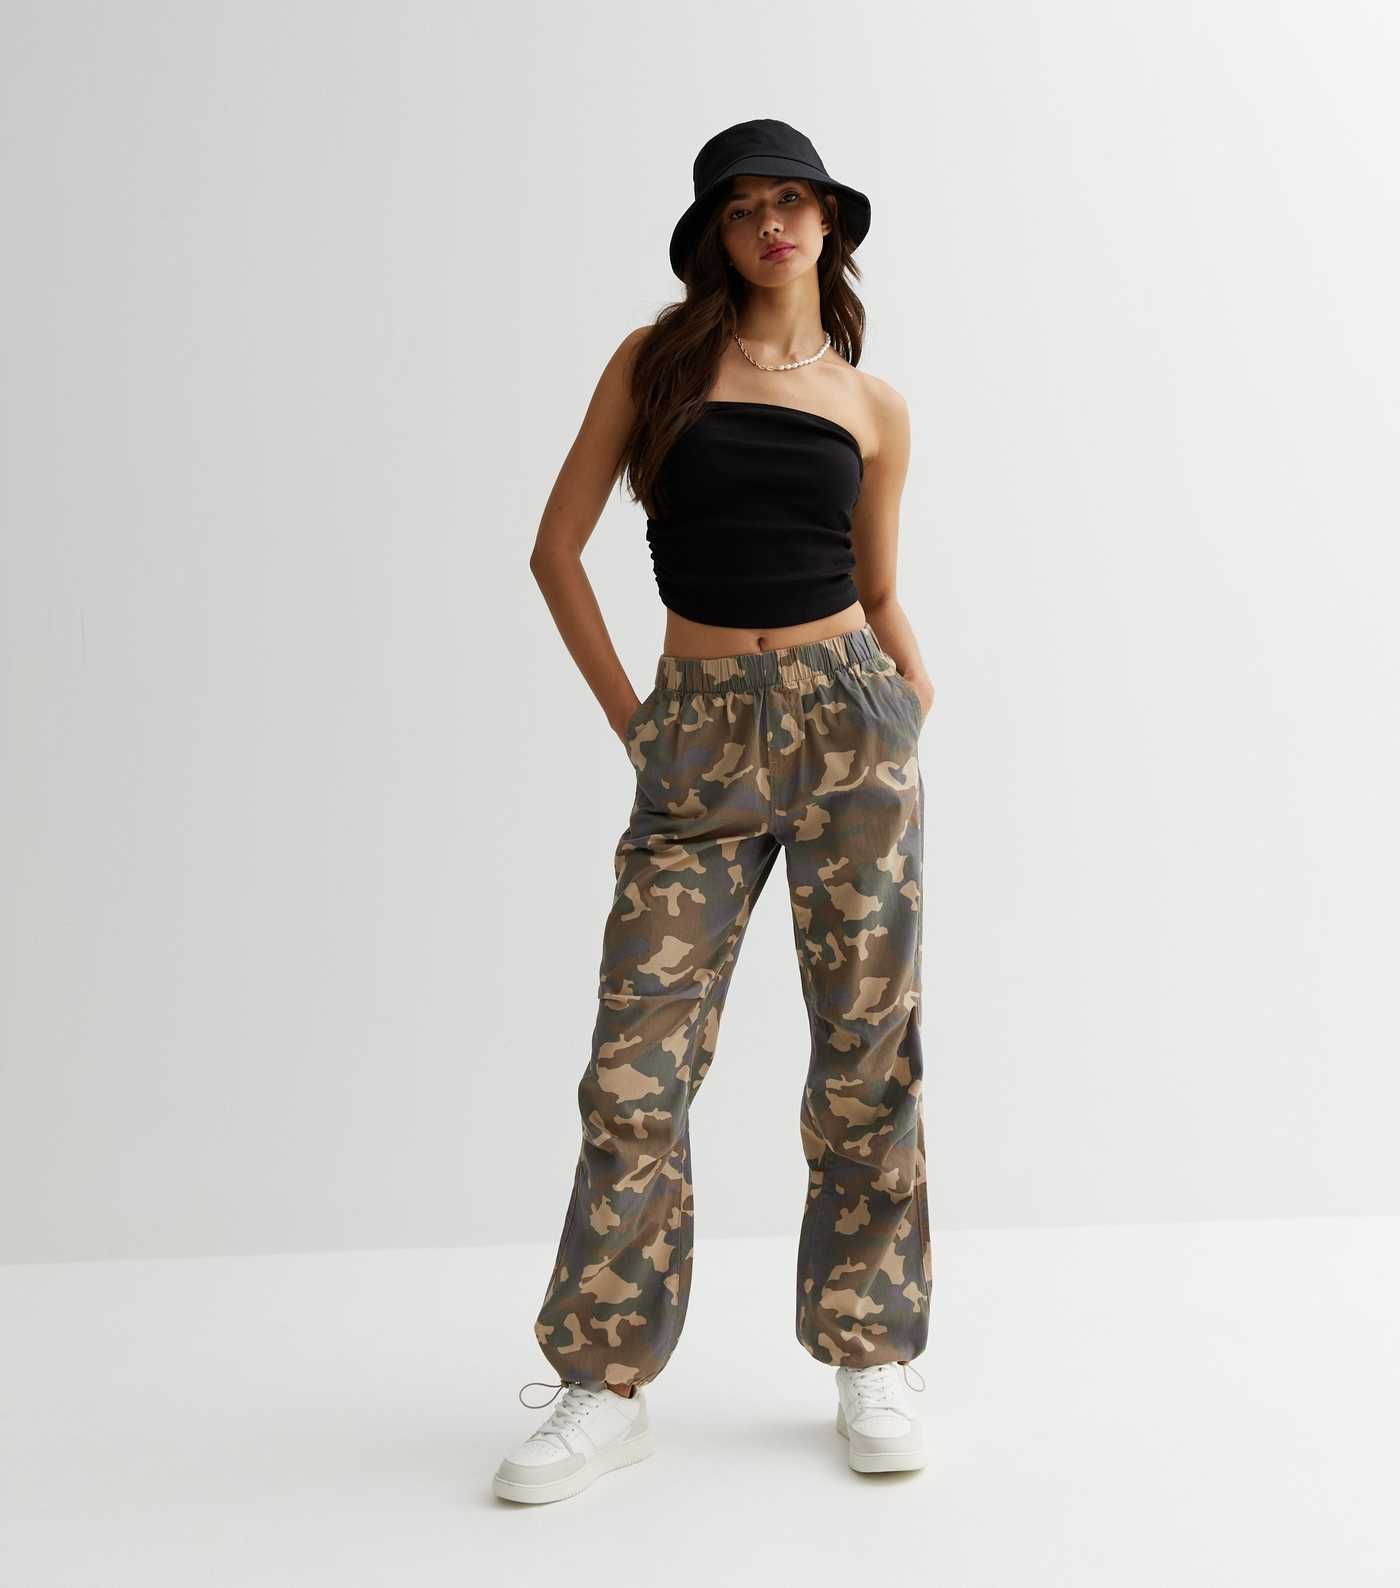 Green Camo Cotton Cuffed Parachute Trousers
						
						Add to Saved Items
						Remove from Sav... | New Look (UK)